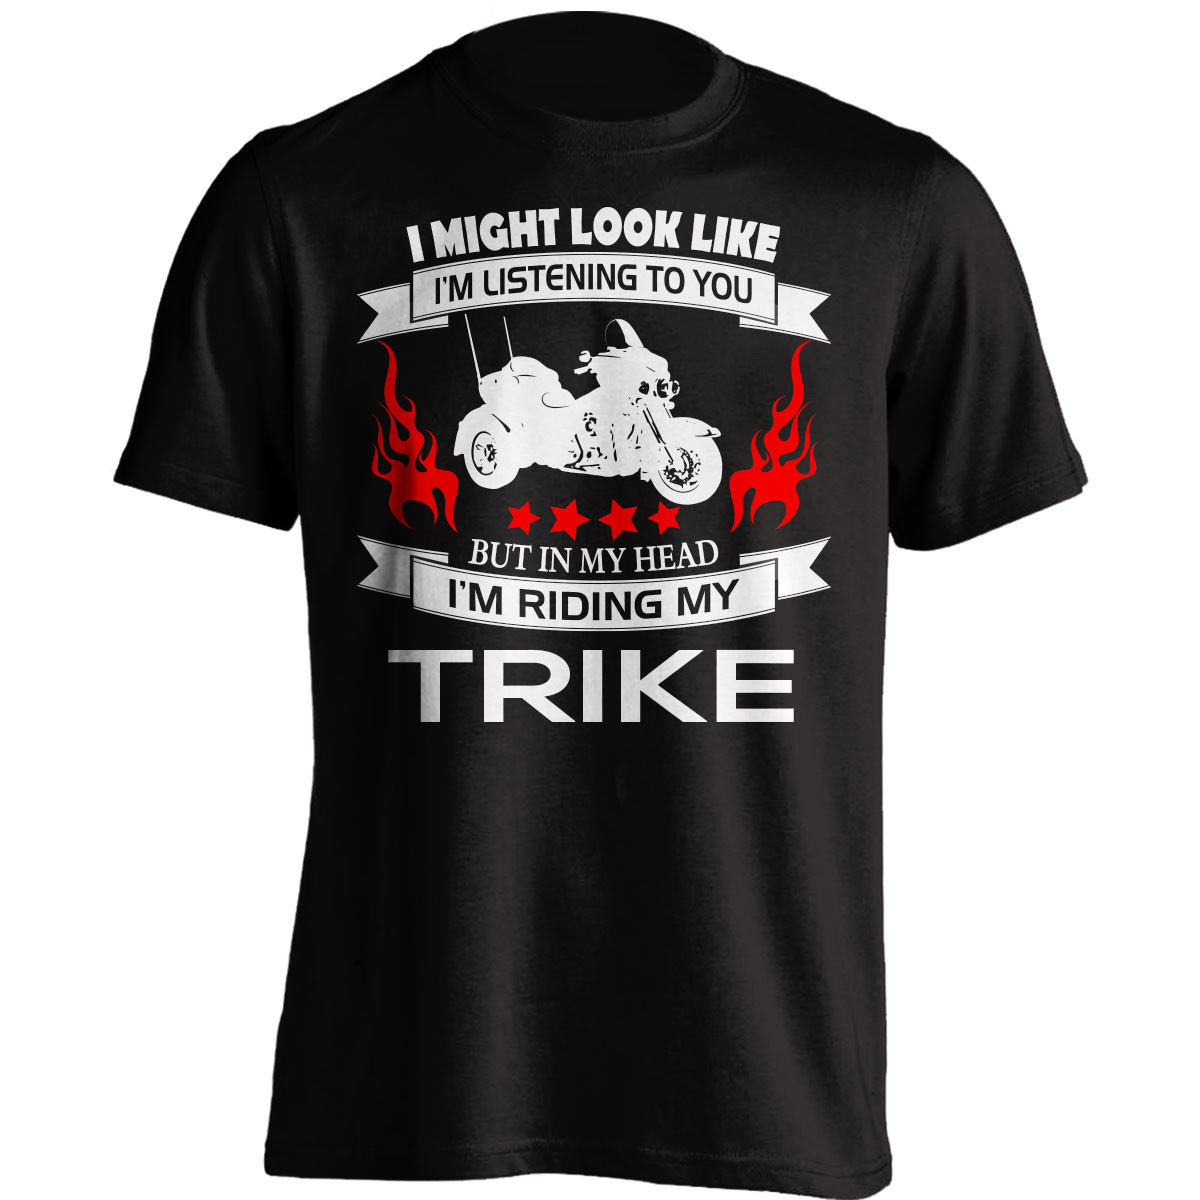 "I Might Look Like I'm Listening To You" Trike T-Shirt